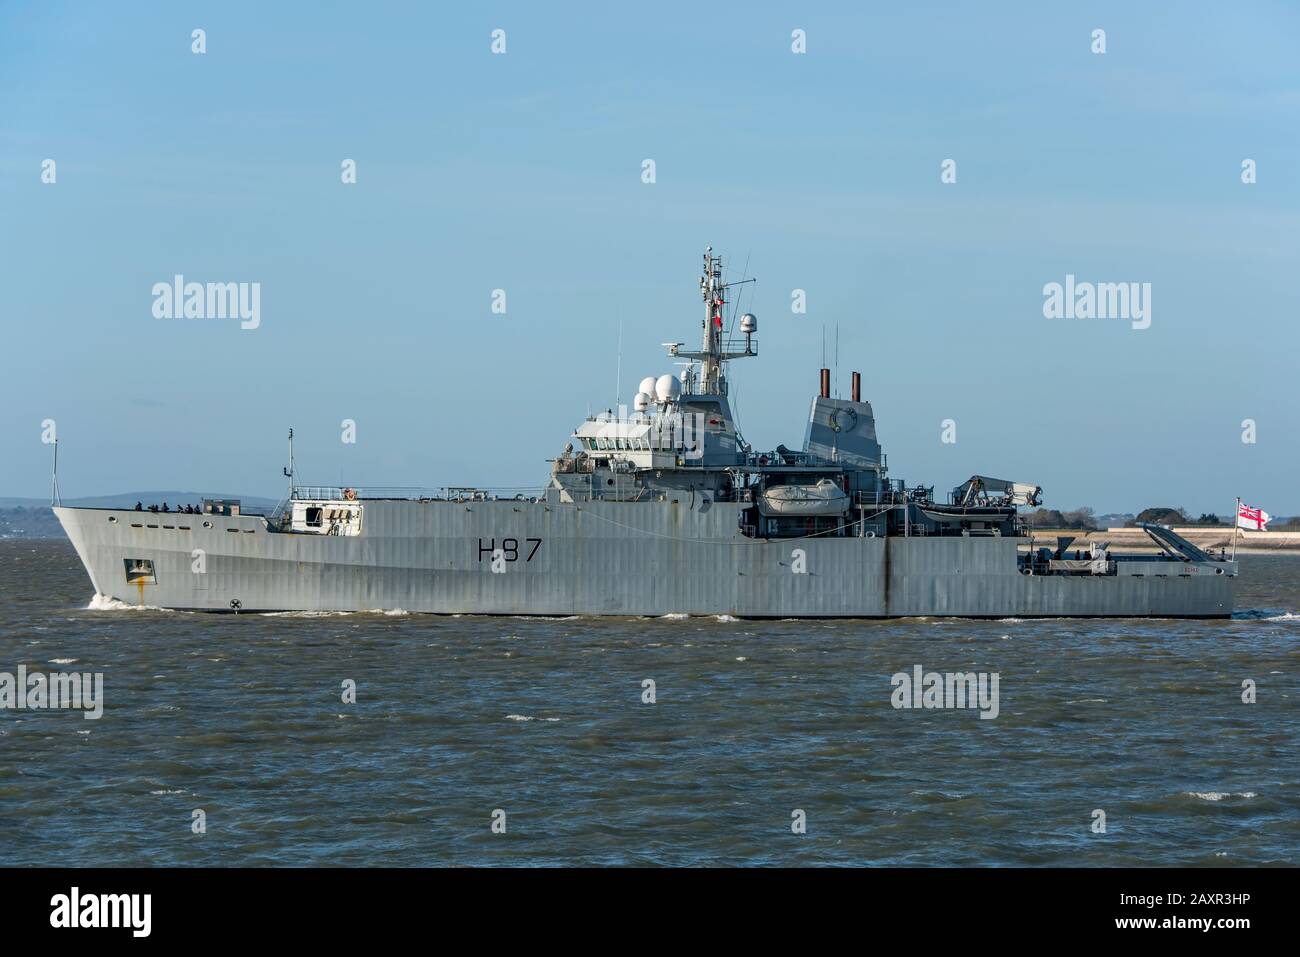 The Royal Navy hydrographic survey and research ship, HMS Echo (H87), in The Solent after leaving Portsmouth, UK on the 12th February 2020. Stock Photo